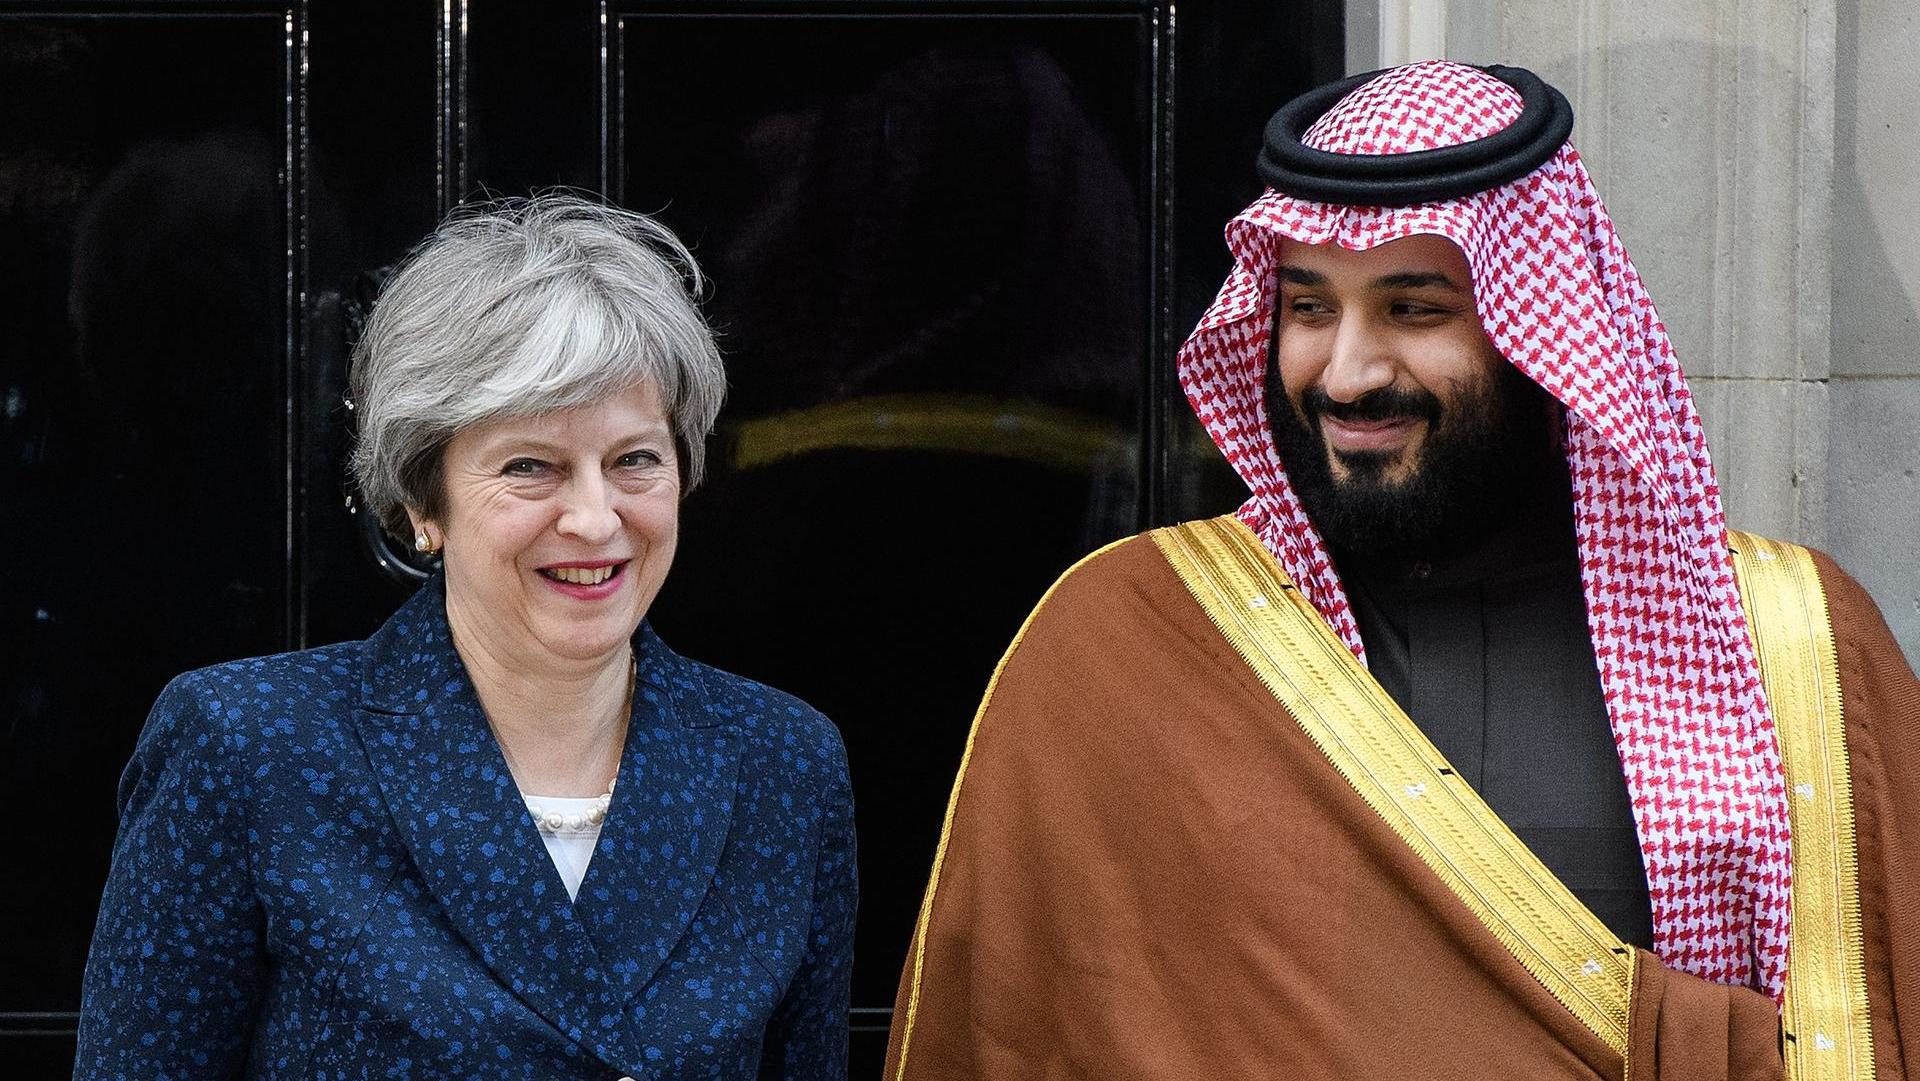 Saudi Crown Prince Mohammed bin Salman stands with British prime minister Theresa May